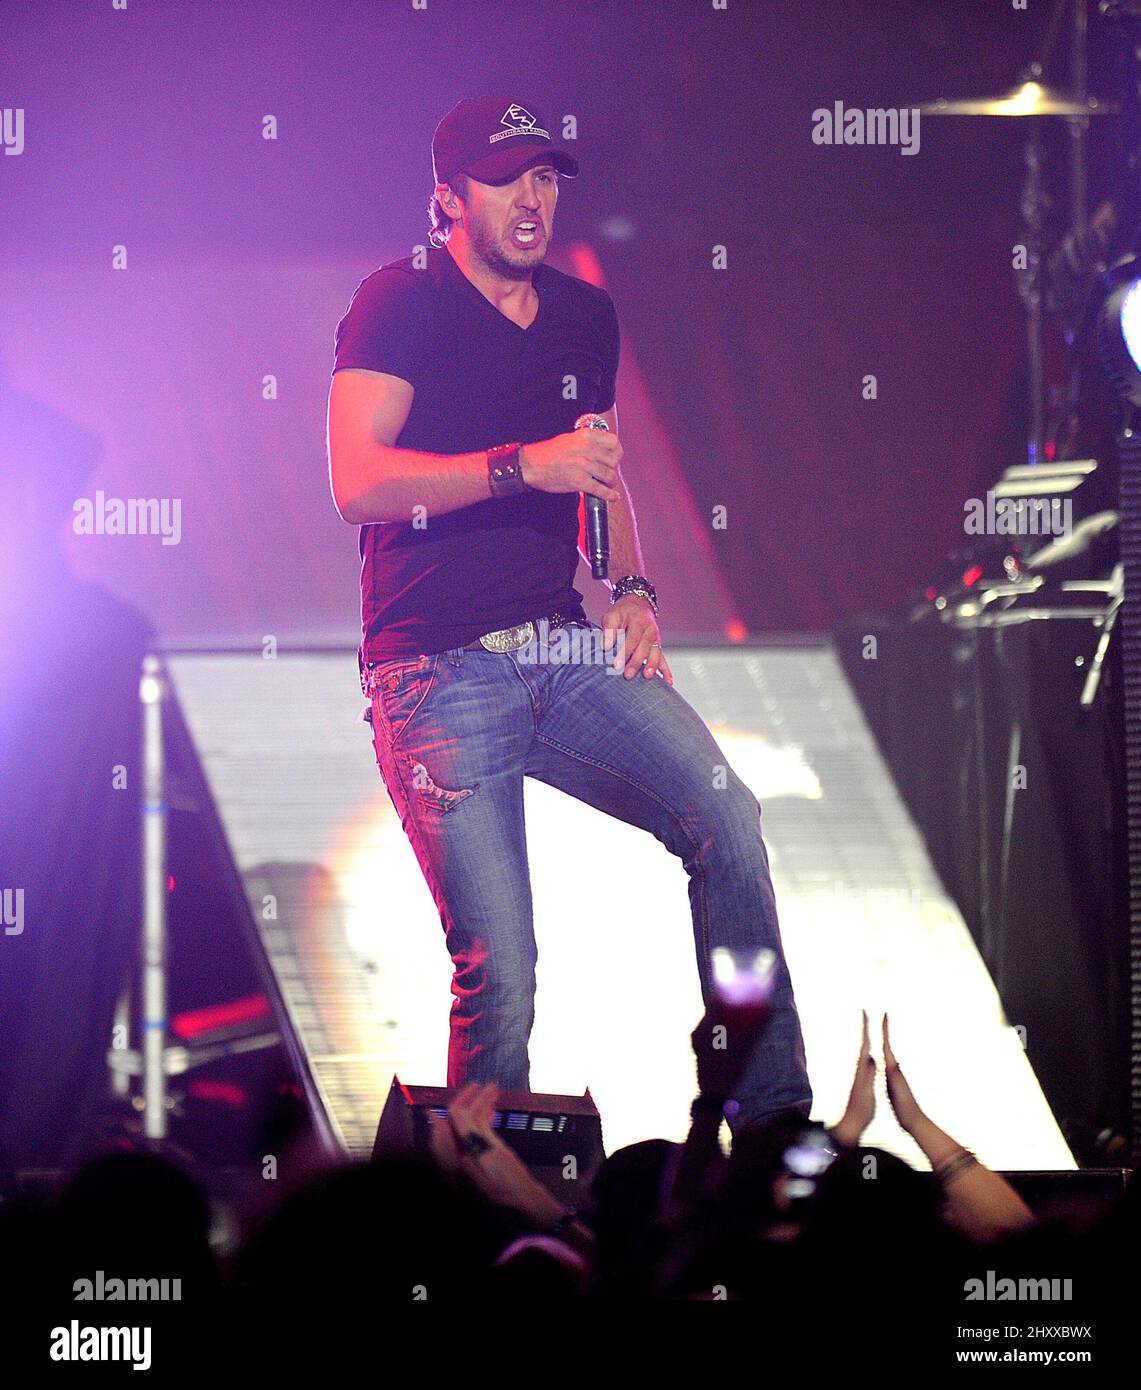 Luke Bryan during the 2012 My Kinda Party Tour stops at the Crown Coliseum, North Carolina Stock Photo